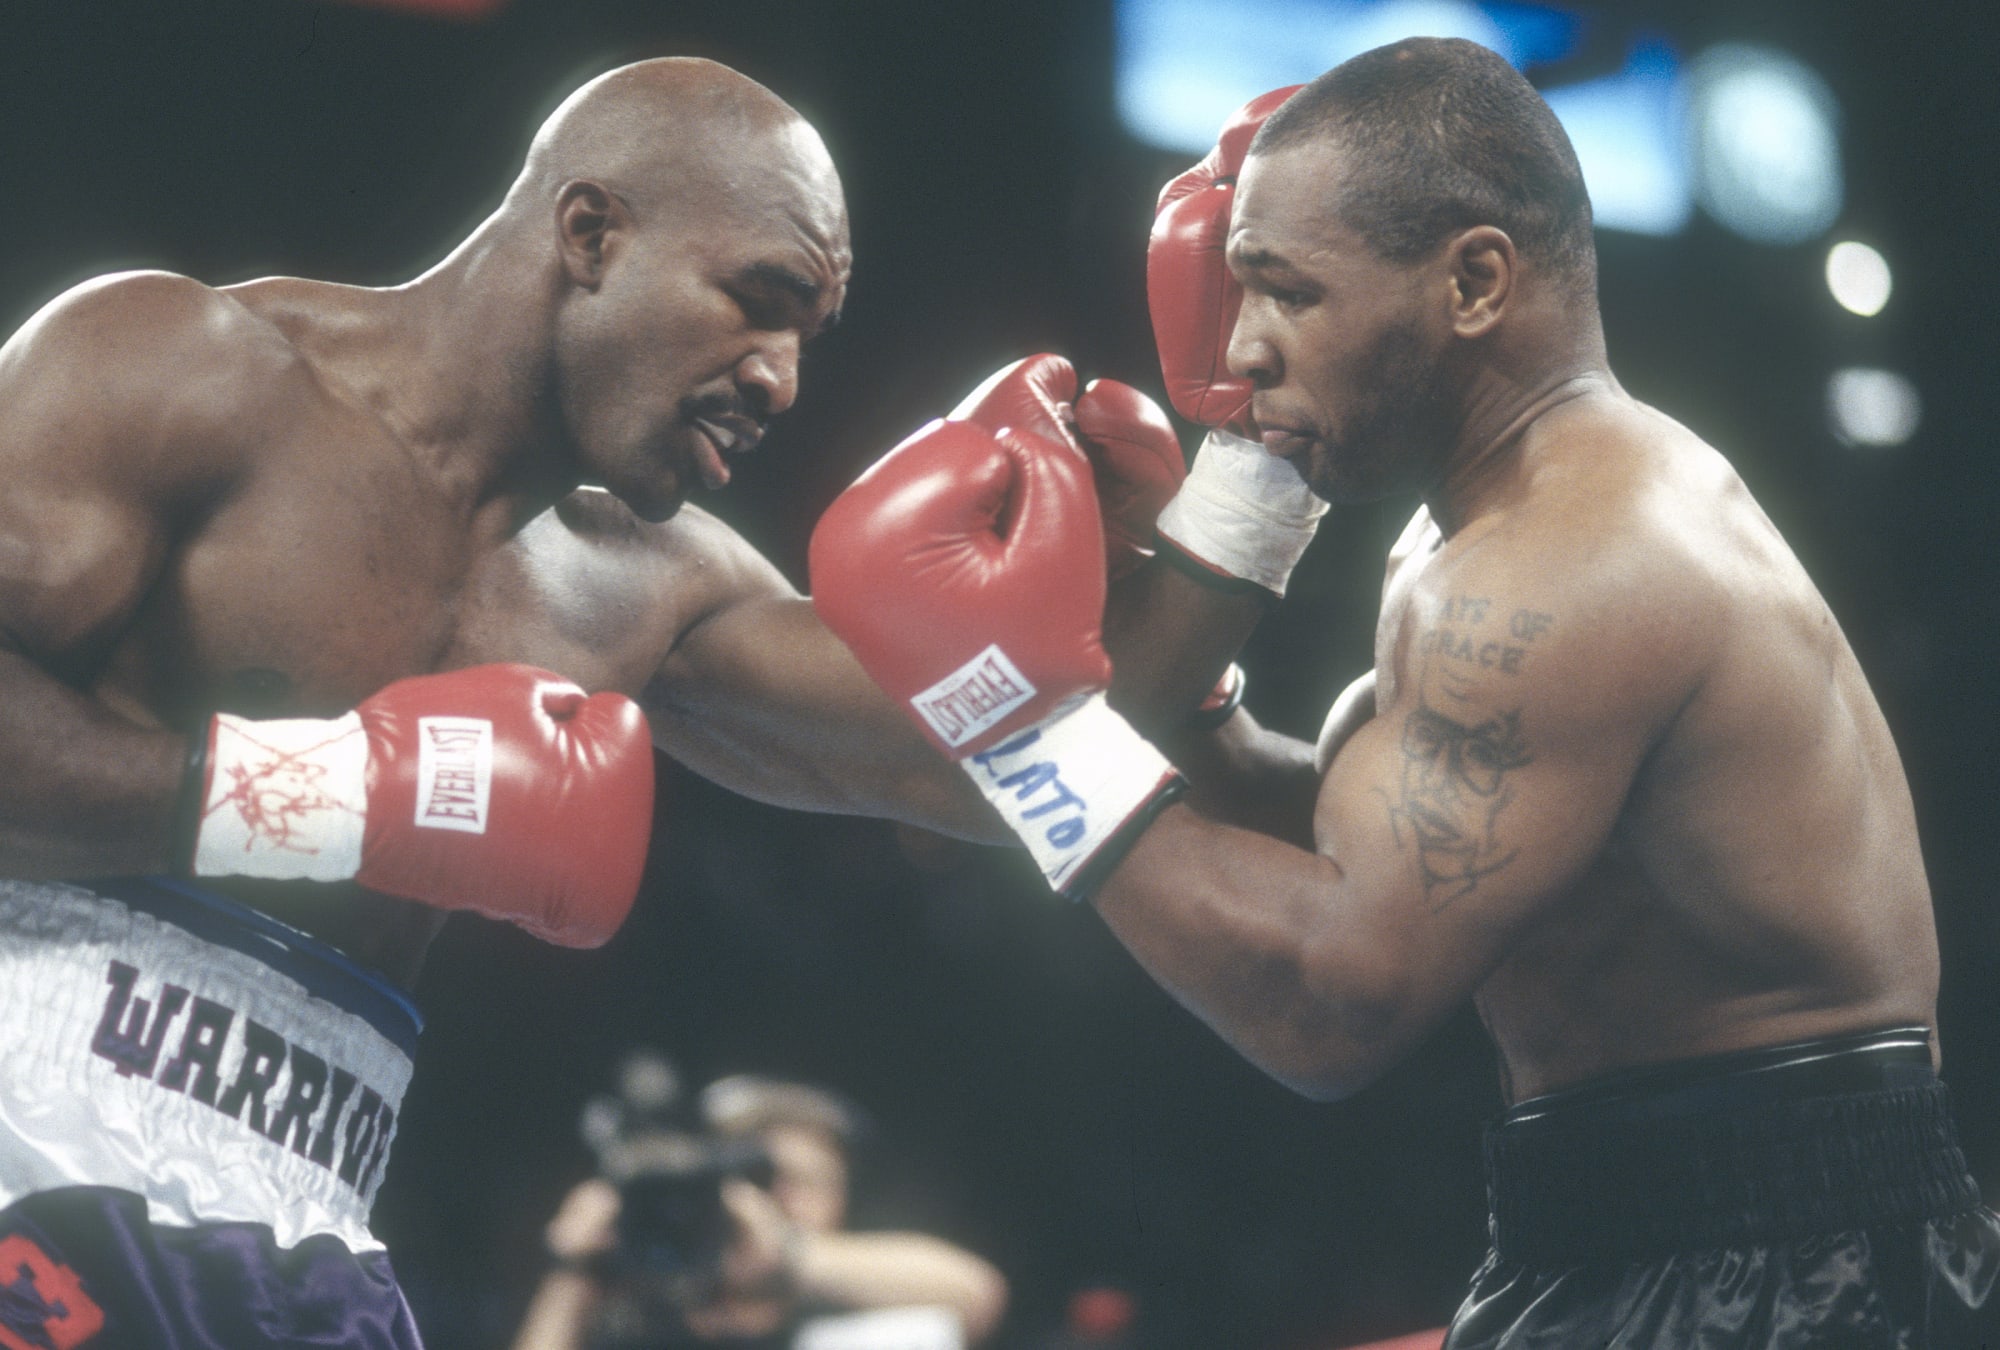 Who would win possible bout between Mike Tyson and Evander Holyfield?